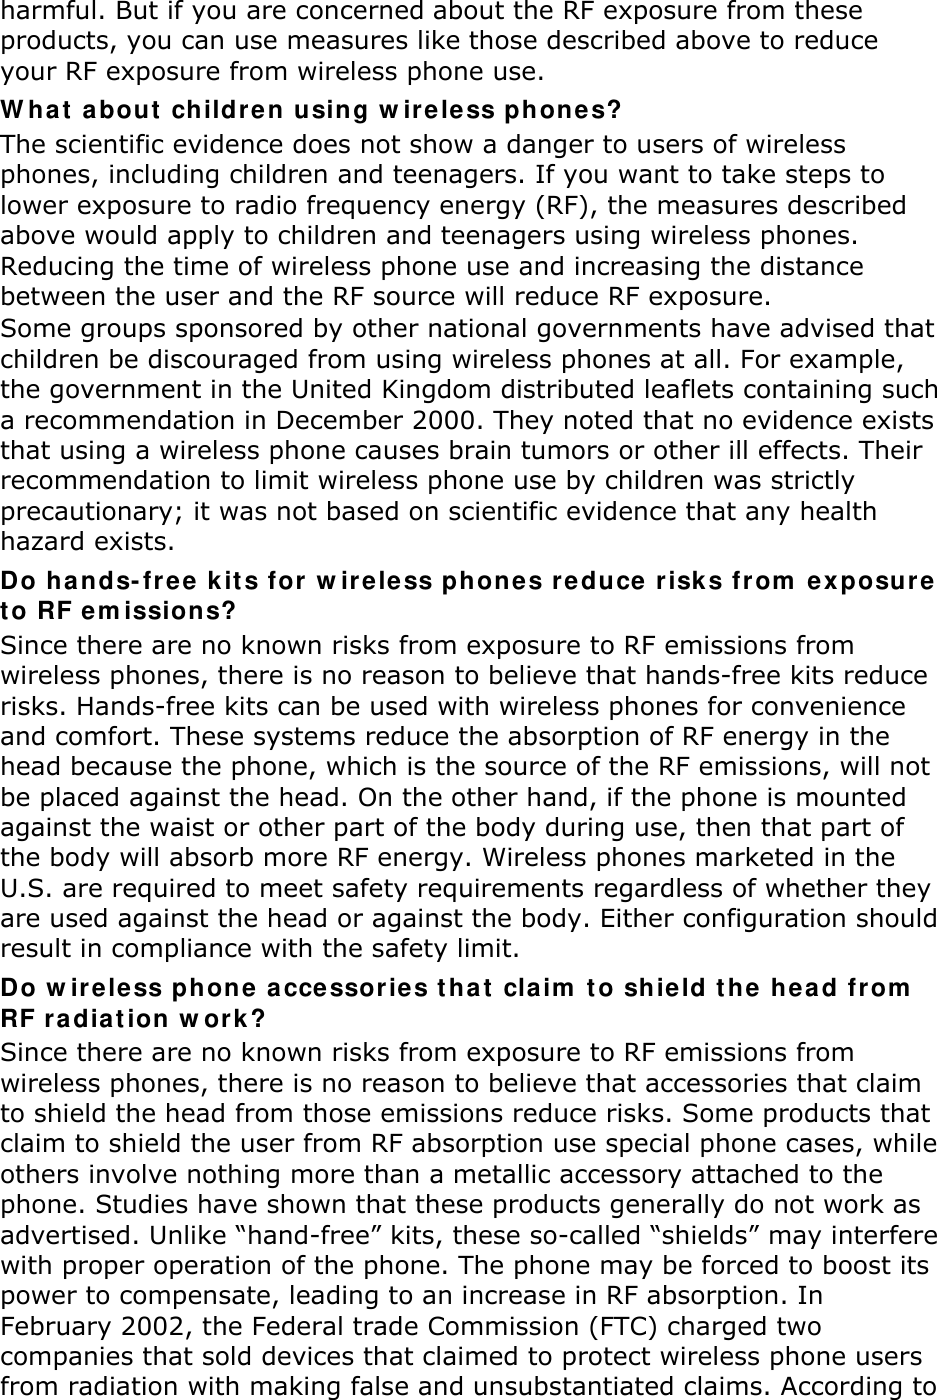 harmful. But if you are concerned about the RF exposure from these products, you can use measures like those described above to reduce your RF exposure from wireless phone use. What about children using wireless phones? The scientific evidence does not show a danger to users of wireless phones, including children and teenagers. If you want to take steps to lower exposure to radio frequency energy (RF), the measures described above would apply to children and teenagers using wireless phones. Reducing the time of wireless phone use and increasing the distance between the user and the RF source will reduce RF exposure. Some groups sponsored by other national governments have advised that children be discouraged from using wireless phones at all. For example, the government in the United Kingdom distributed leaflets containing such a recommendation in December 2000. They noted that no evidence exists that using a wireless phone causes brain tumors or other ill effects. Their recommendation to limit wireless phone use by children was strictly precautionary; it was not based on scientific evidence that any health hazard exists.   Do hands-free kits for wireless phones reduce risks from exposure to RF emissions? Since there are no known risks from exposure to RF emissions from wireless phones, there is no reason to believe that hands-free kits reduce risks. Hands-free kits can be used with wireless phones for convenience and comfort. These systems reduce the absorption of RF energy in the head because the phone, which is the source of the RF emissions, will not be placed against the head. On the other hand, if the phone is mounted against the waist or other part of the body during use, then that part of the body will absorb more RF energy. Wireless phones marketed in the U.S. are required to meet safety requirements regardless of whether they are used against the head or against the body. Either configuration should result in compliance with the safety limit. Do wireless phone accessories that claim to shield the head from RF radiation work? Since there are no known risks from exposure to RF emissions from wireless phones, there is no reason to believe that accessories that claim to shield the head from those emissions reduce risks. Some products that claim to shield the user from RF absorption use special phone cases, while others involve nothing more than a metallic accessory attached to the phone. Studies have shown that these products generally do not work as advertised. Unlike “hand-free” kits, these so-called “shields” may interfere with proper operation of the phone. The phone may be forced to boost its power to compensate, leading to an increase in RF absorption. In February 2002, the Federal trade Commission (FTC) charged two companies that sold devices that claimed to protect wireless phone users from radiation with making false and unsubstantiated claims. According to 